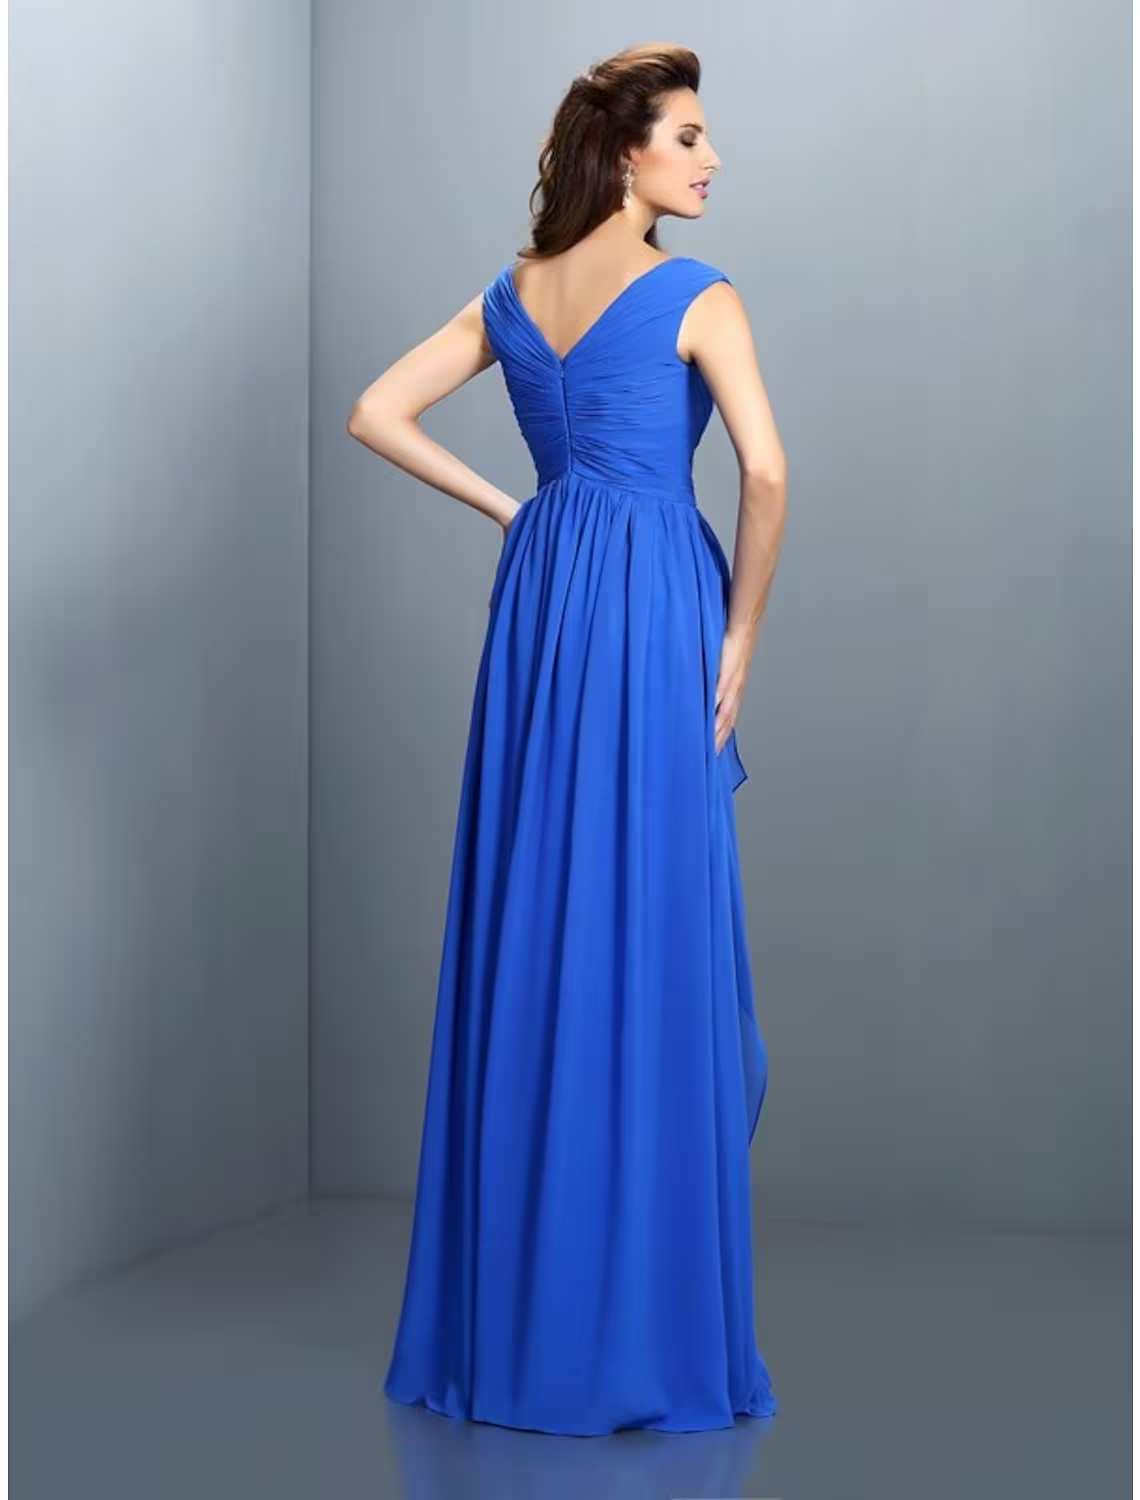 Royal Blue Share  Photo by Supplier   A-Line Evening Gown Sparkle & Shine Dress Wedding Guest Floor Length Sleeveless V Neck Chiffon with Rhinestone Ruched Sequin